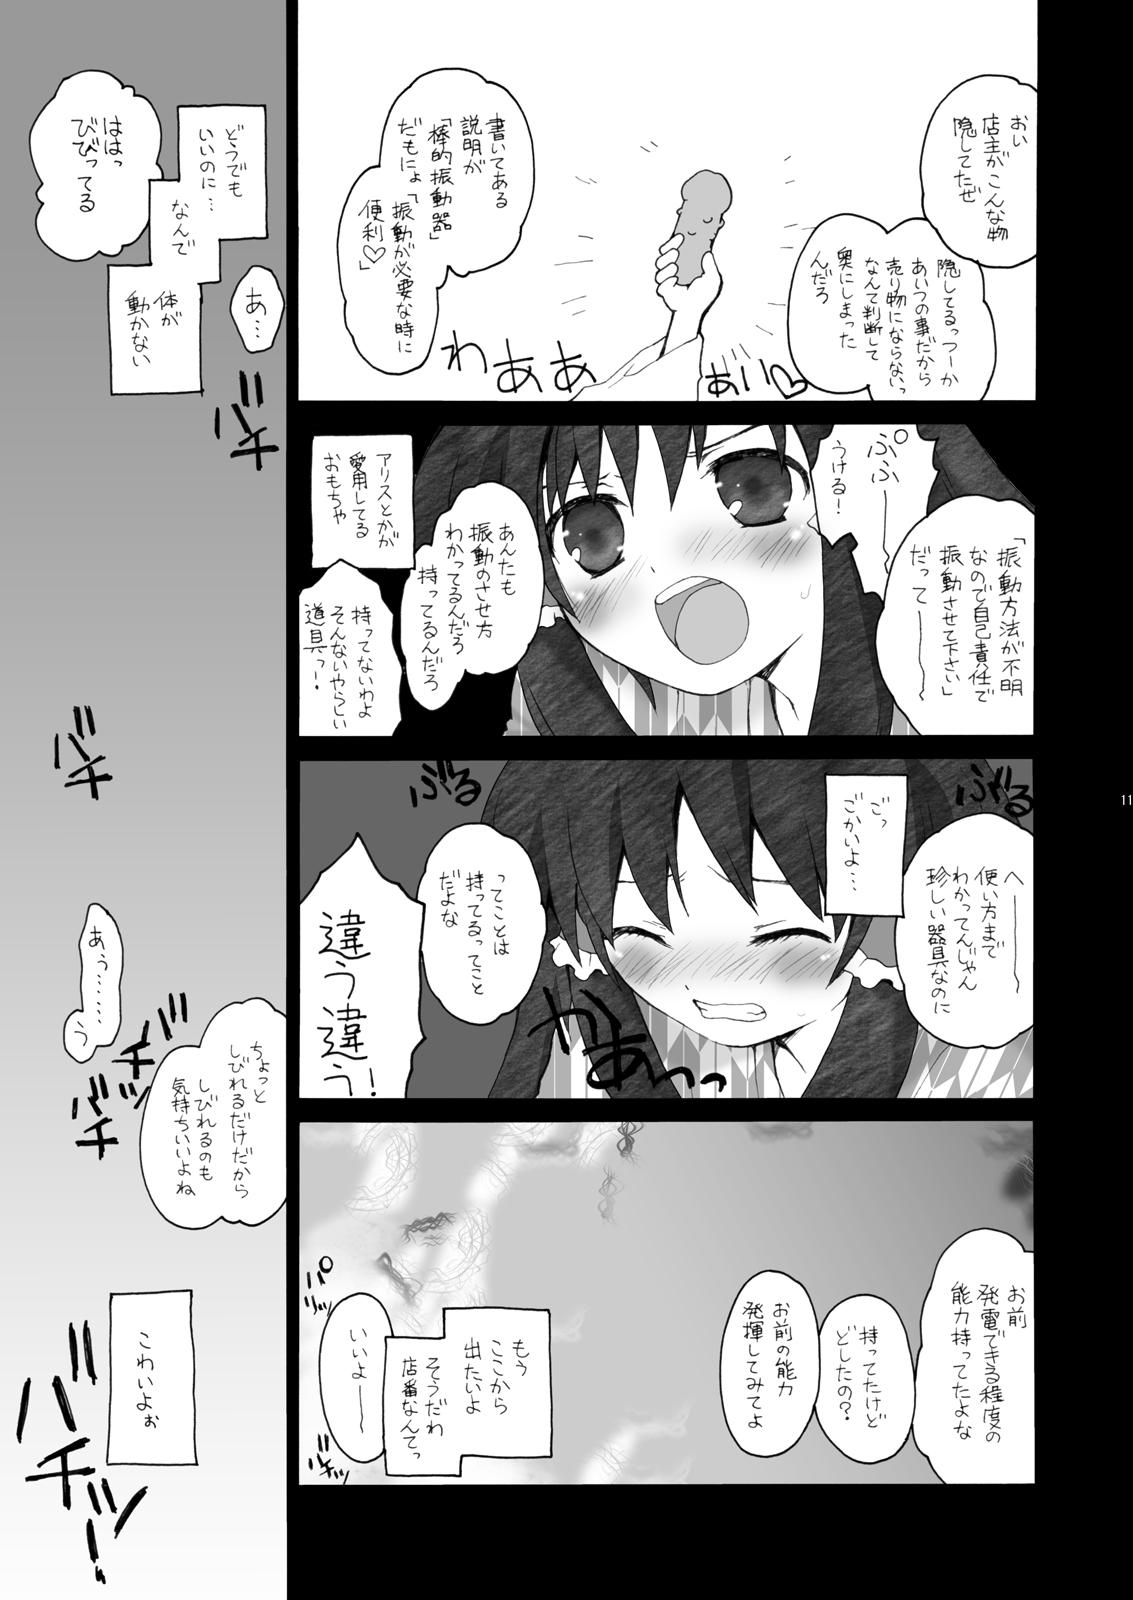 Comendo けしからん娘達～あるお店の一日総集編～ - Touhou project Sex Massage - Page 9